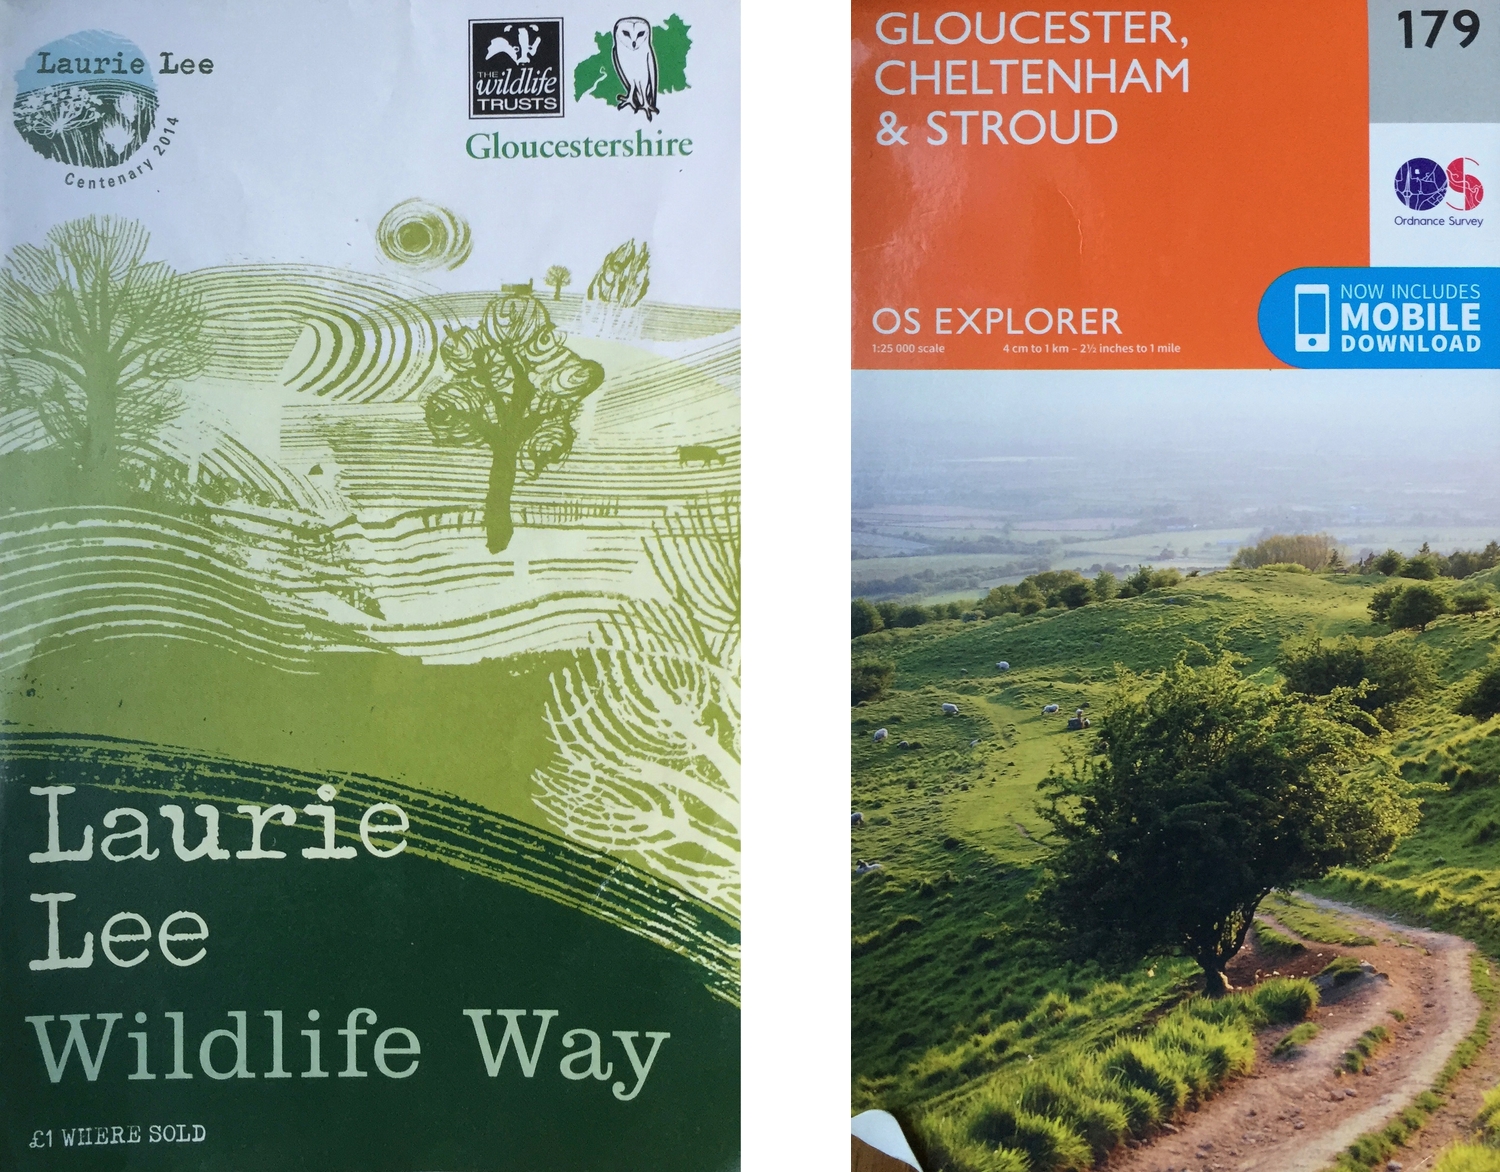 Laurie Lee: Recommended Booklet and OS Map.